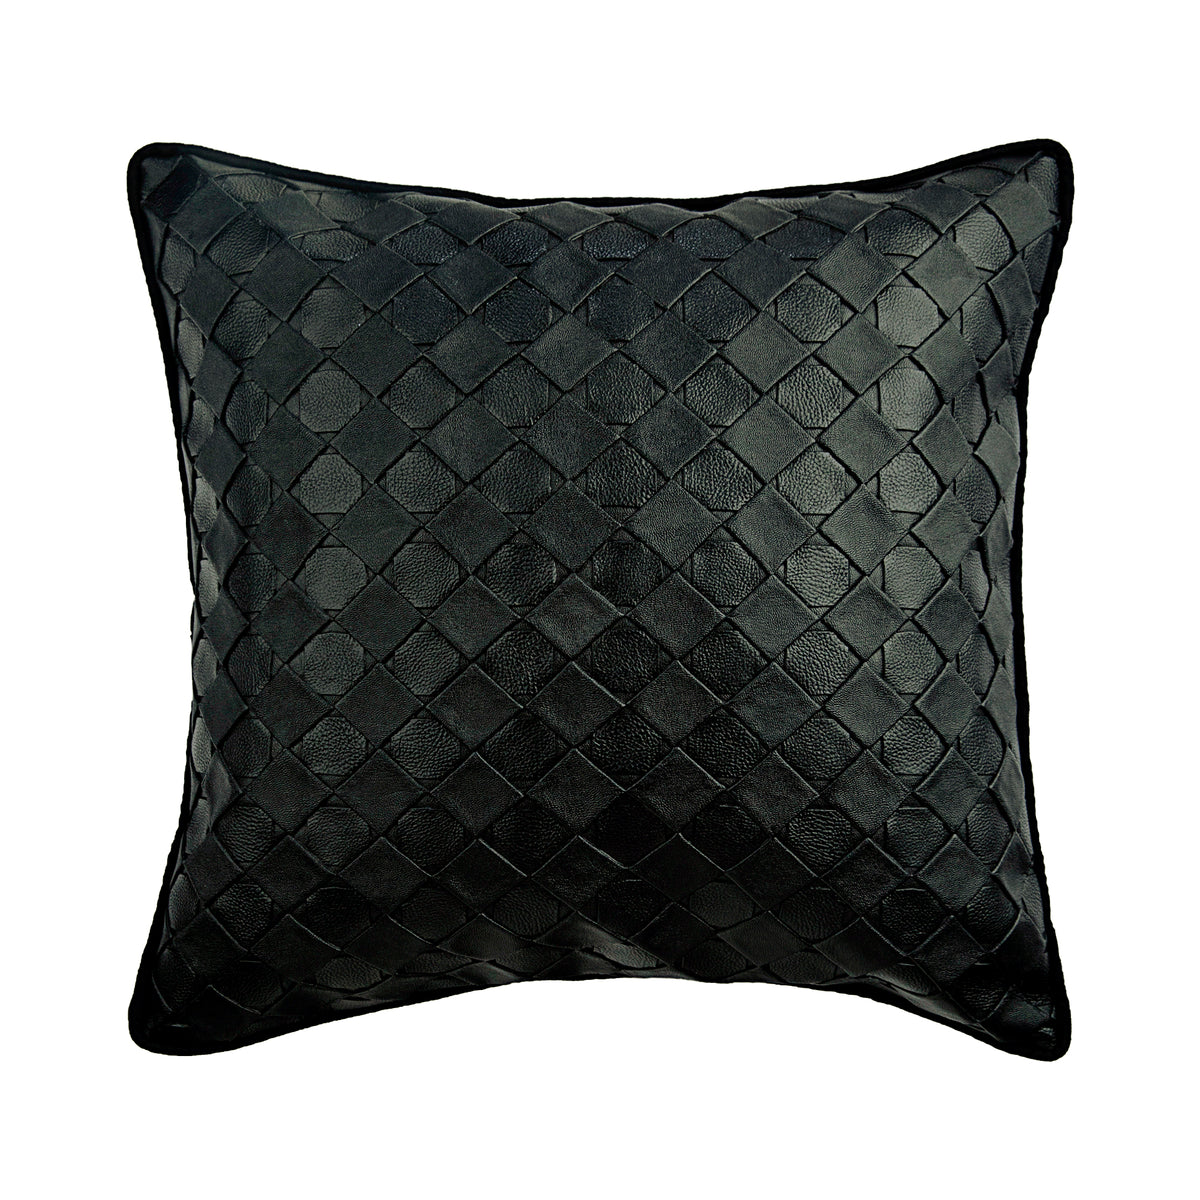 Black and White Pillow Cover Modern Black Throw Pillow Cover Black